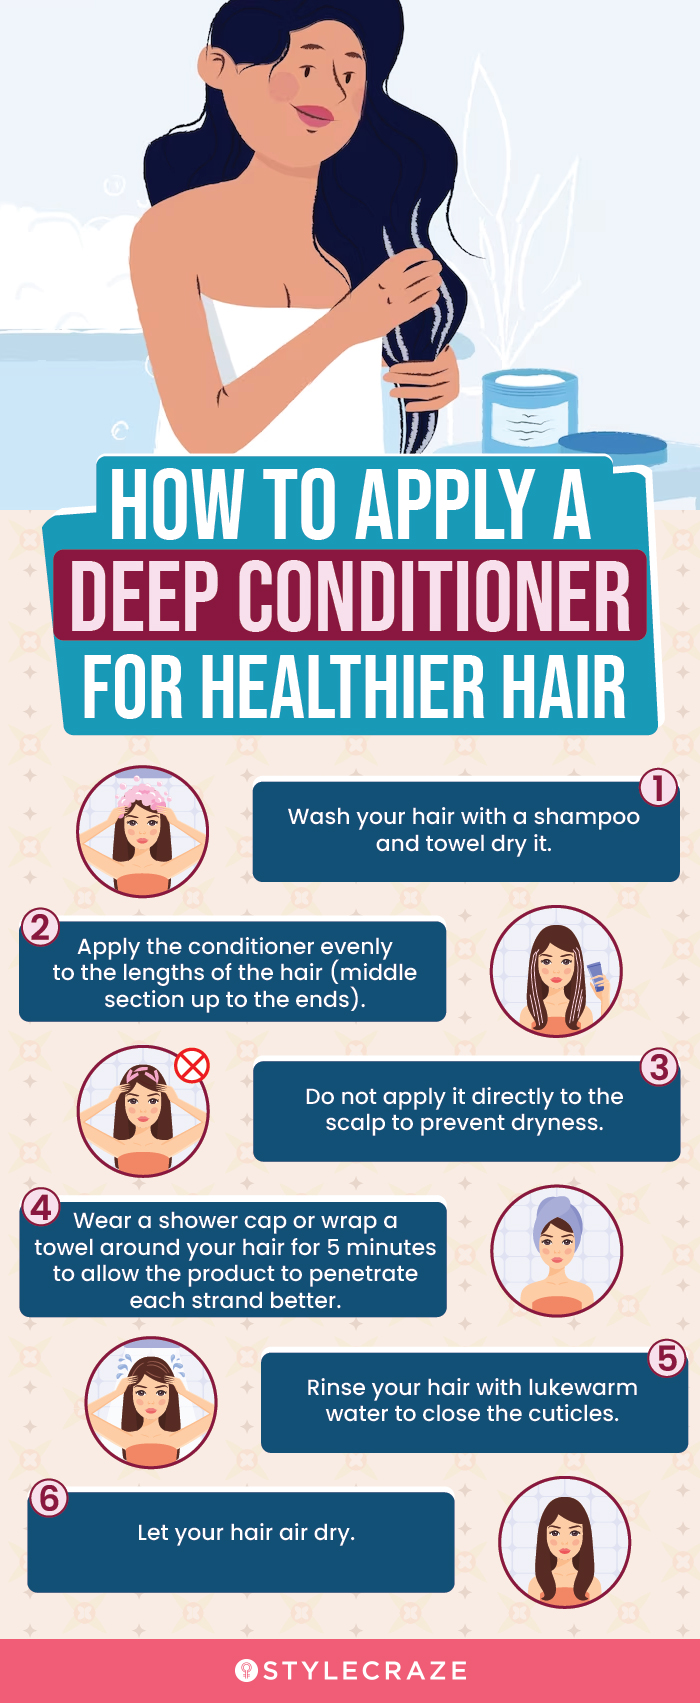 How To Apply A Deep Conditioner For Healthier Hair (infographic)